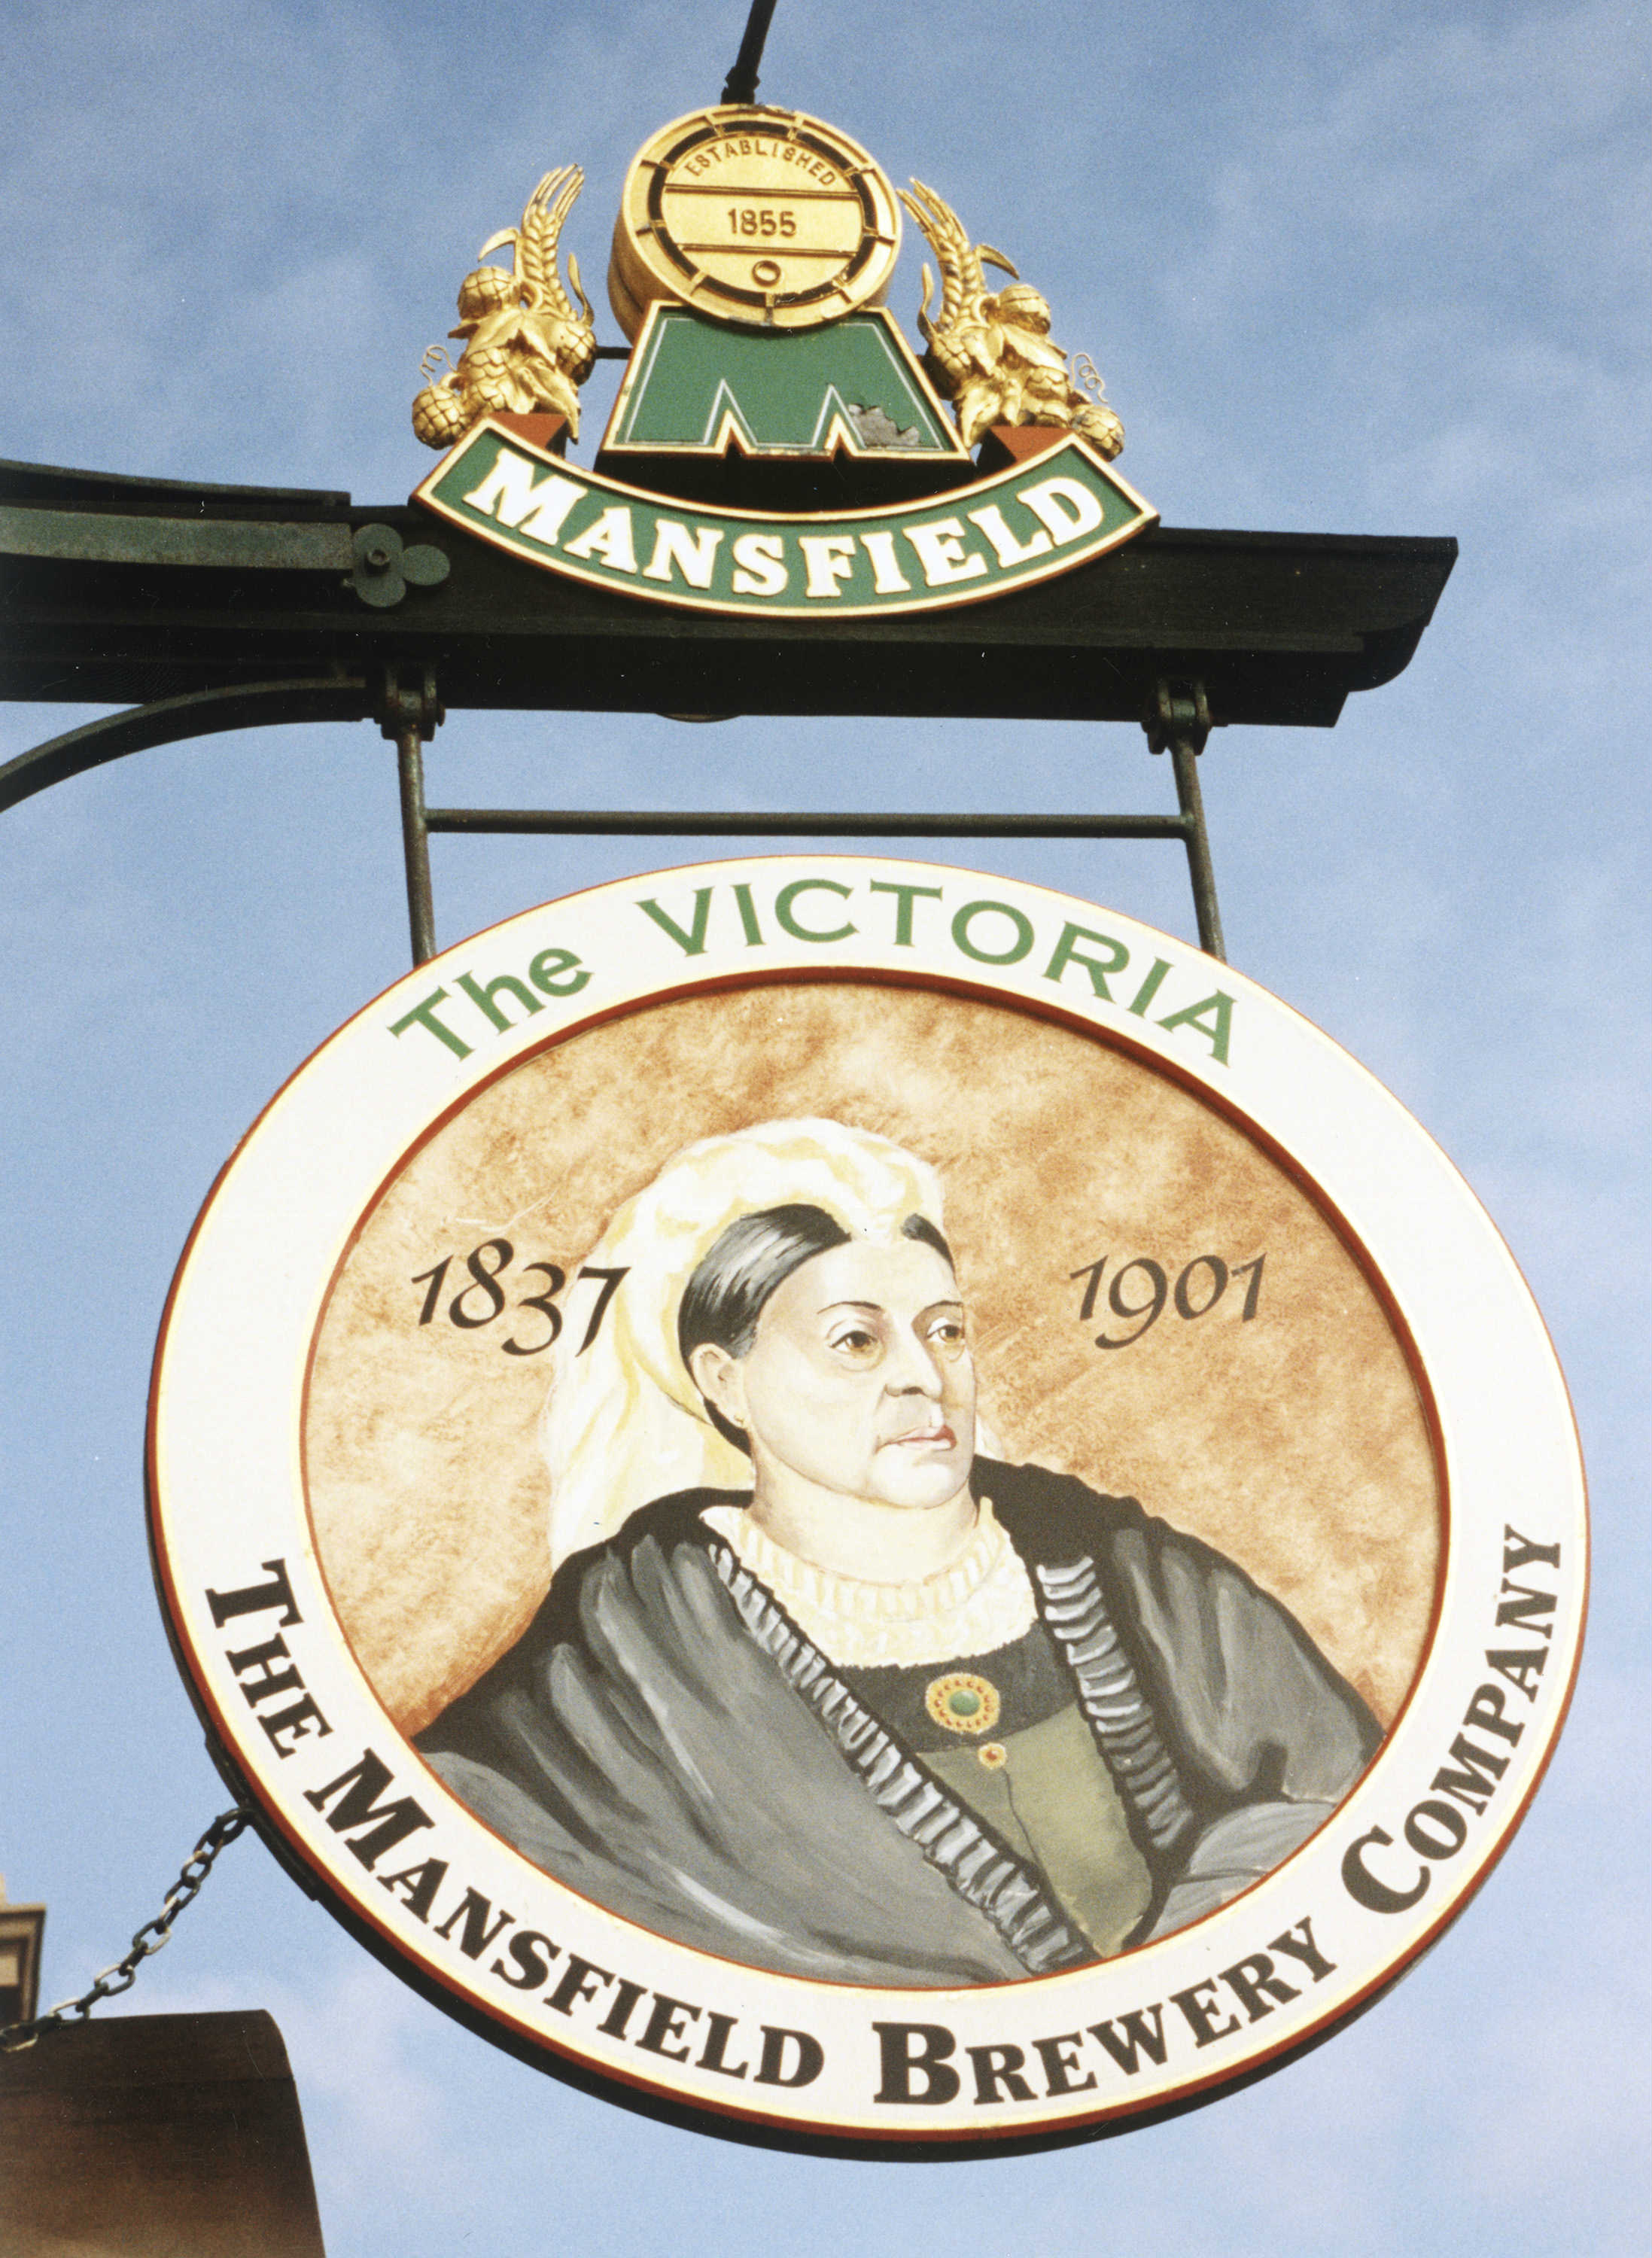 Mansfield Brewery sign